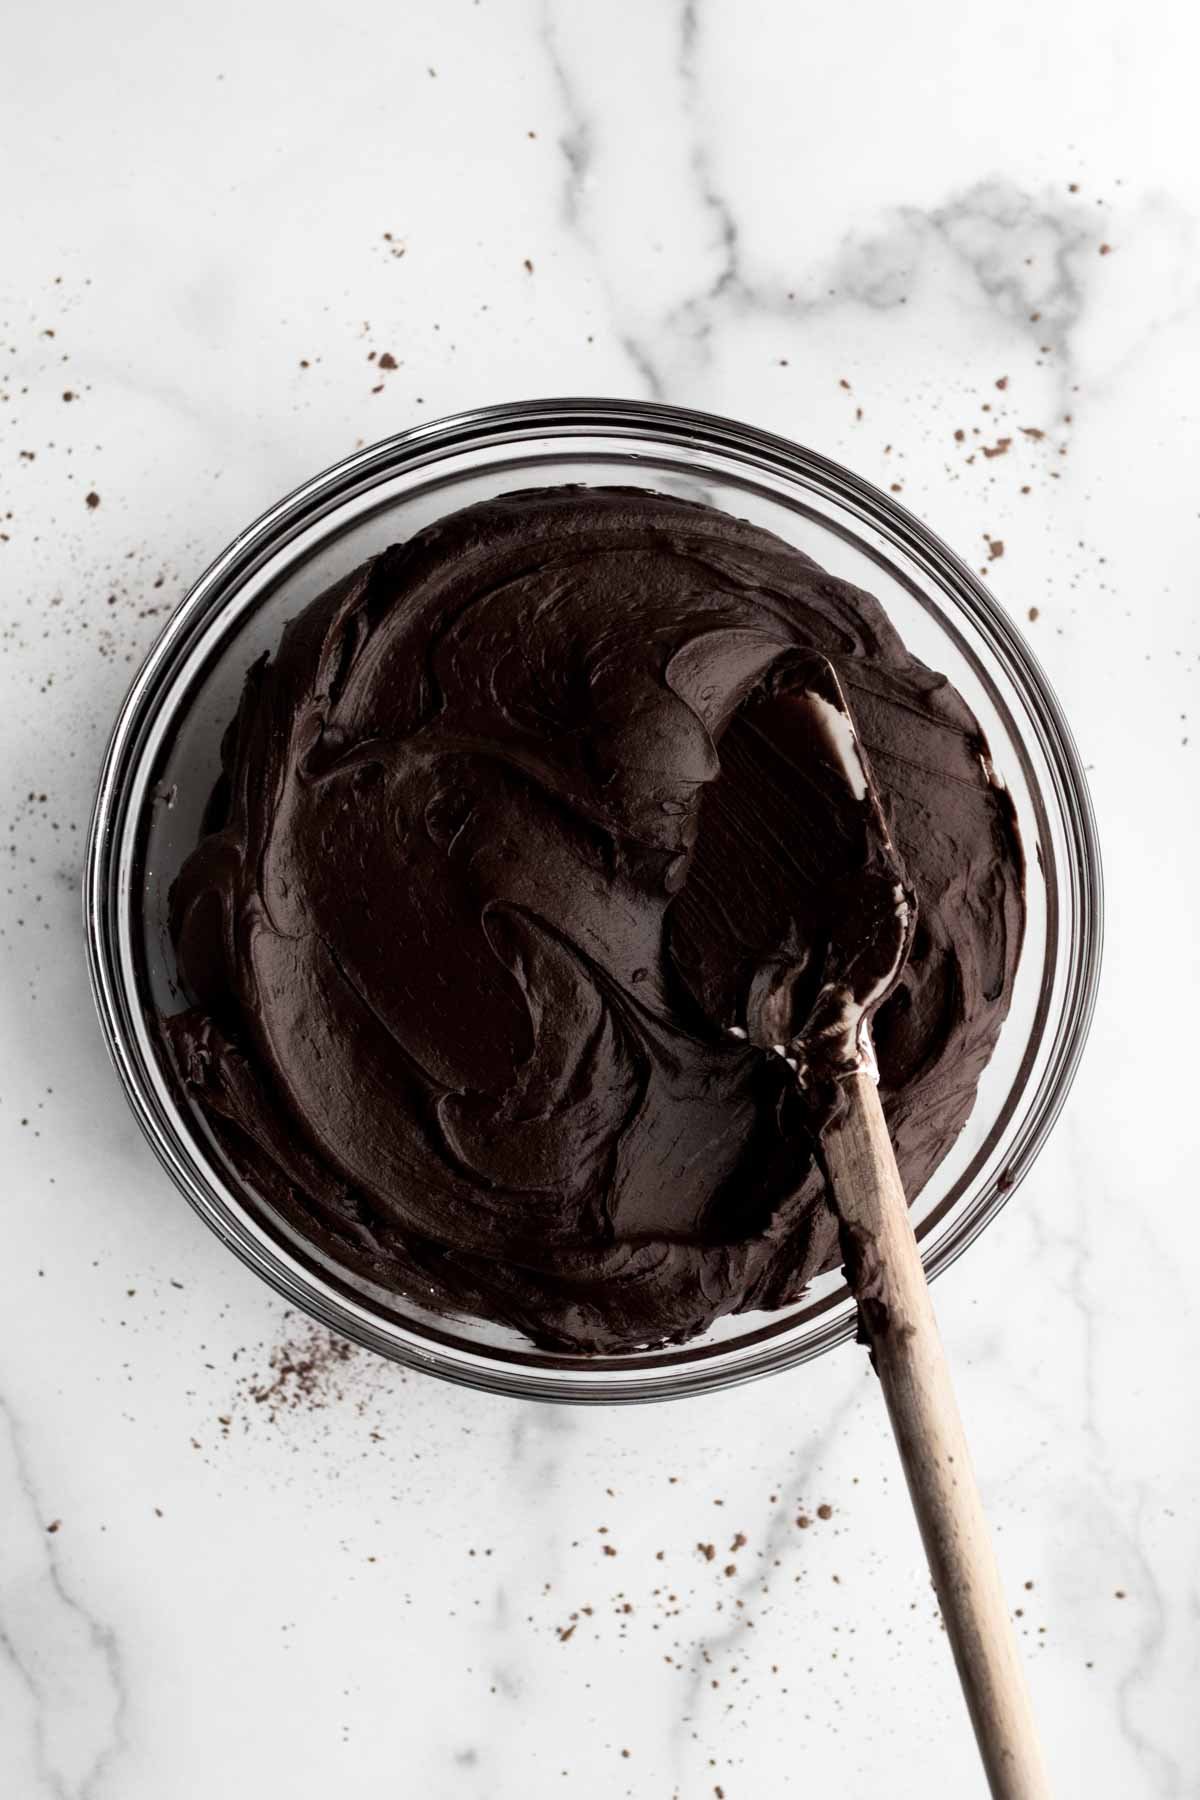 A bowl filled with swirls of chocolate frosting.